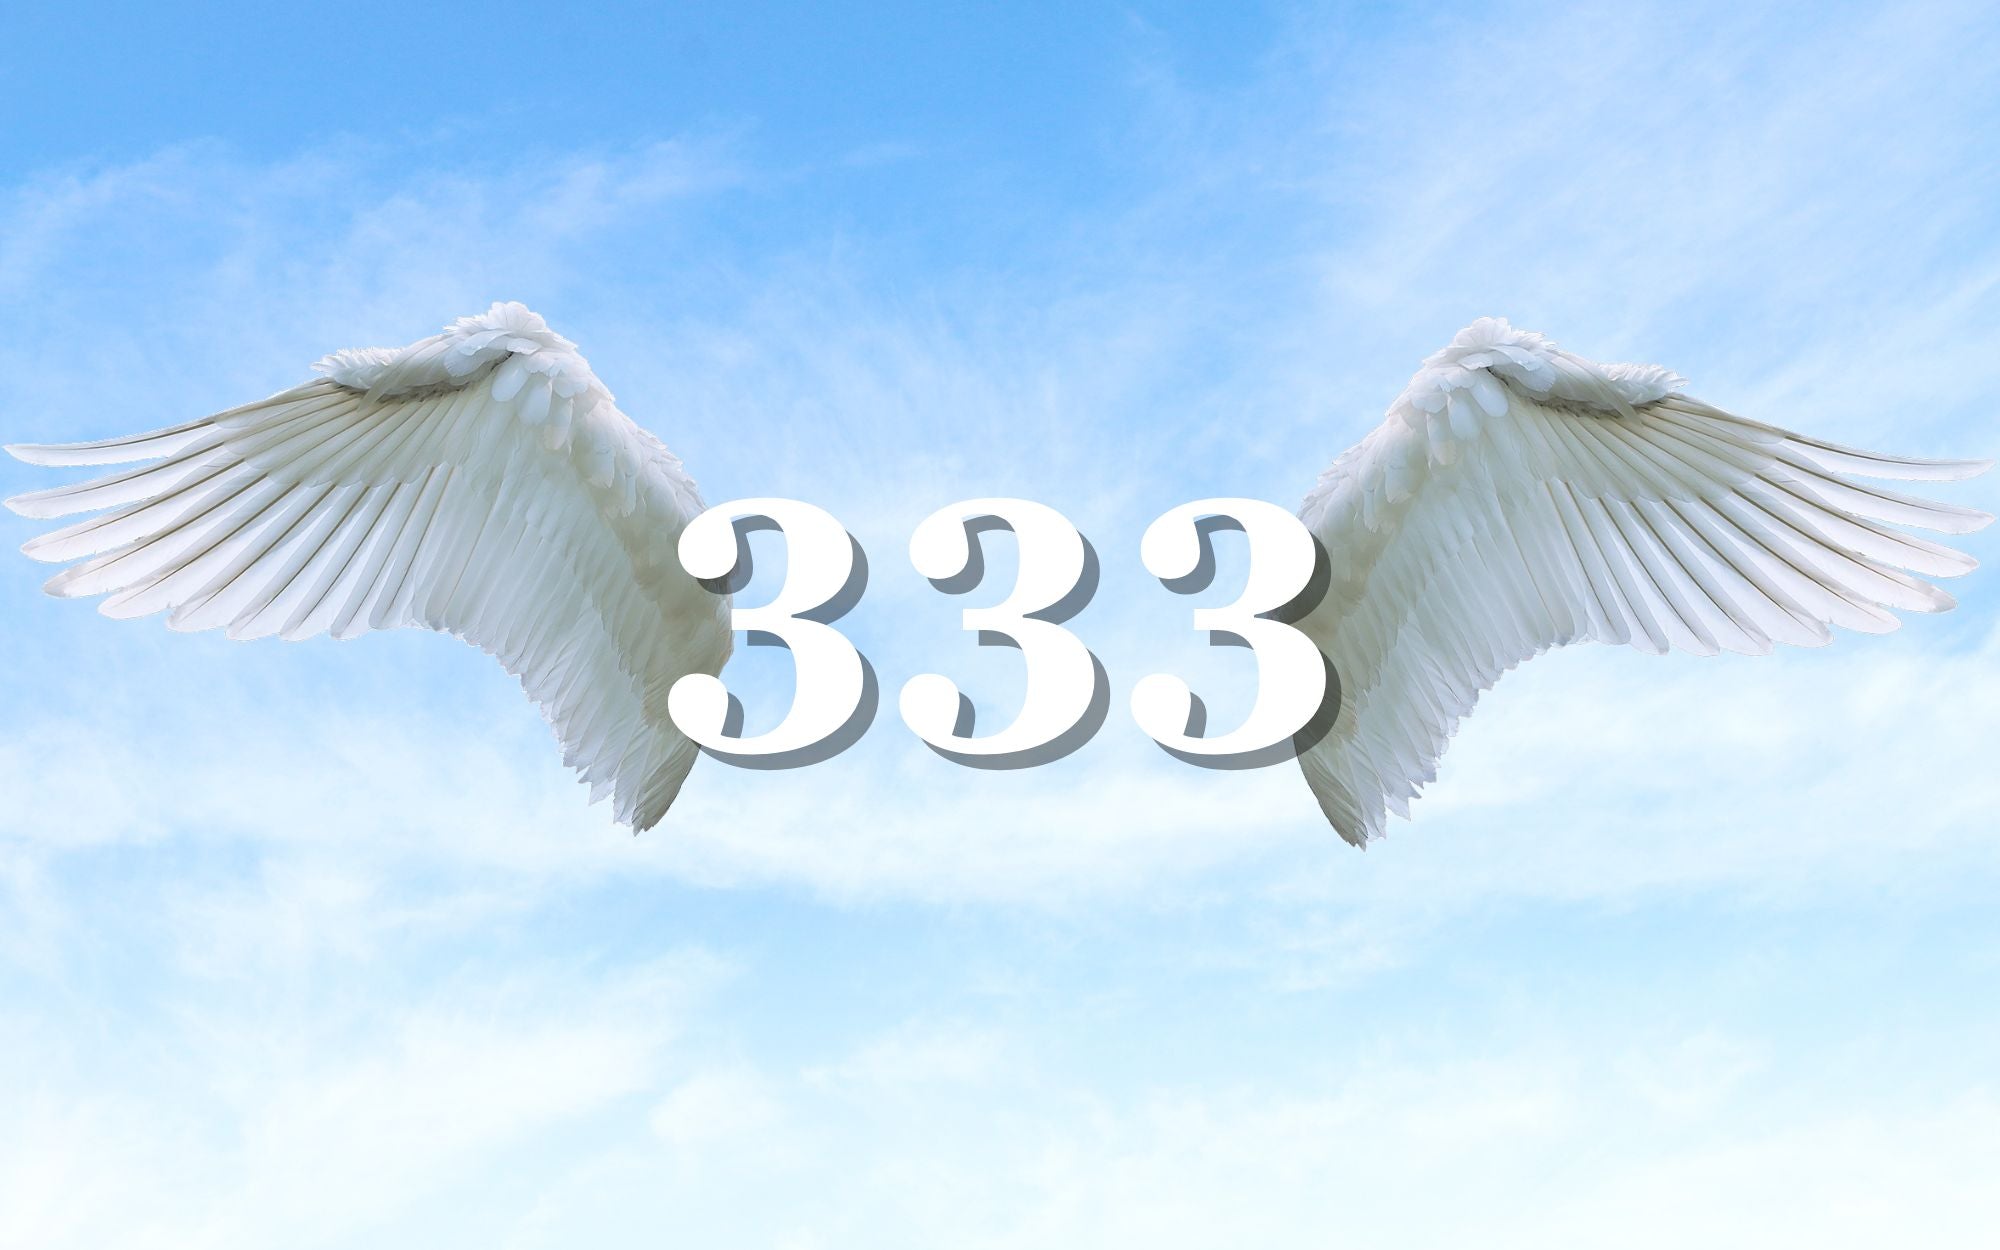 angel numbers meaning - 333